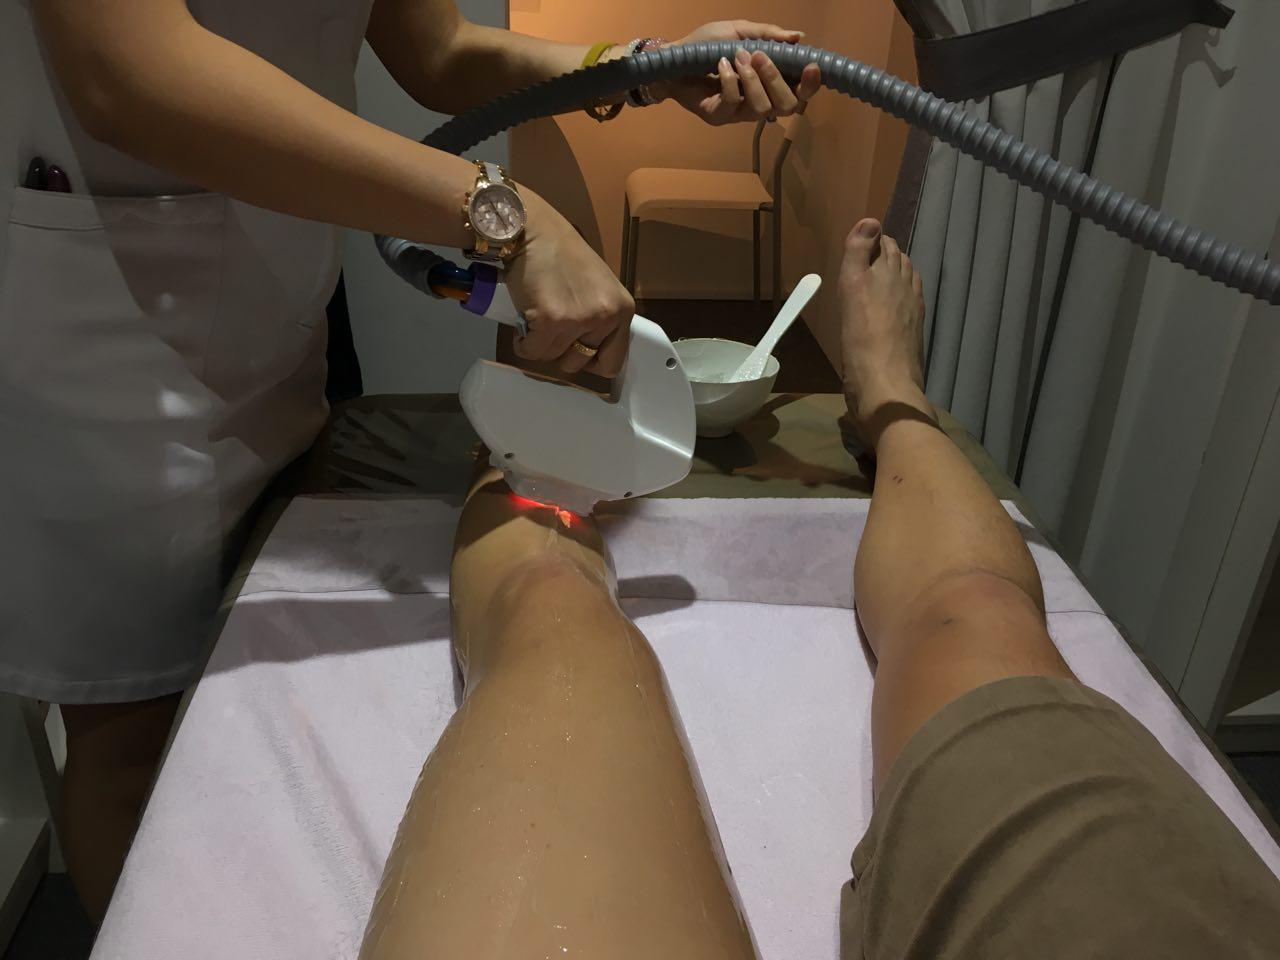 laser hair removal singapore